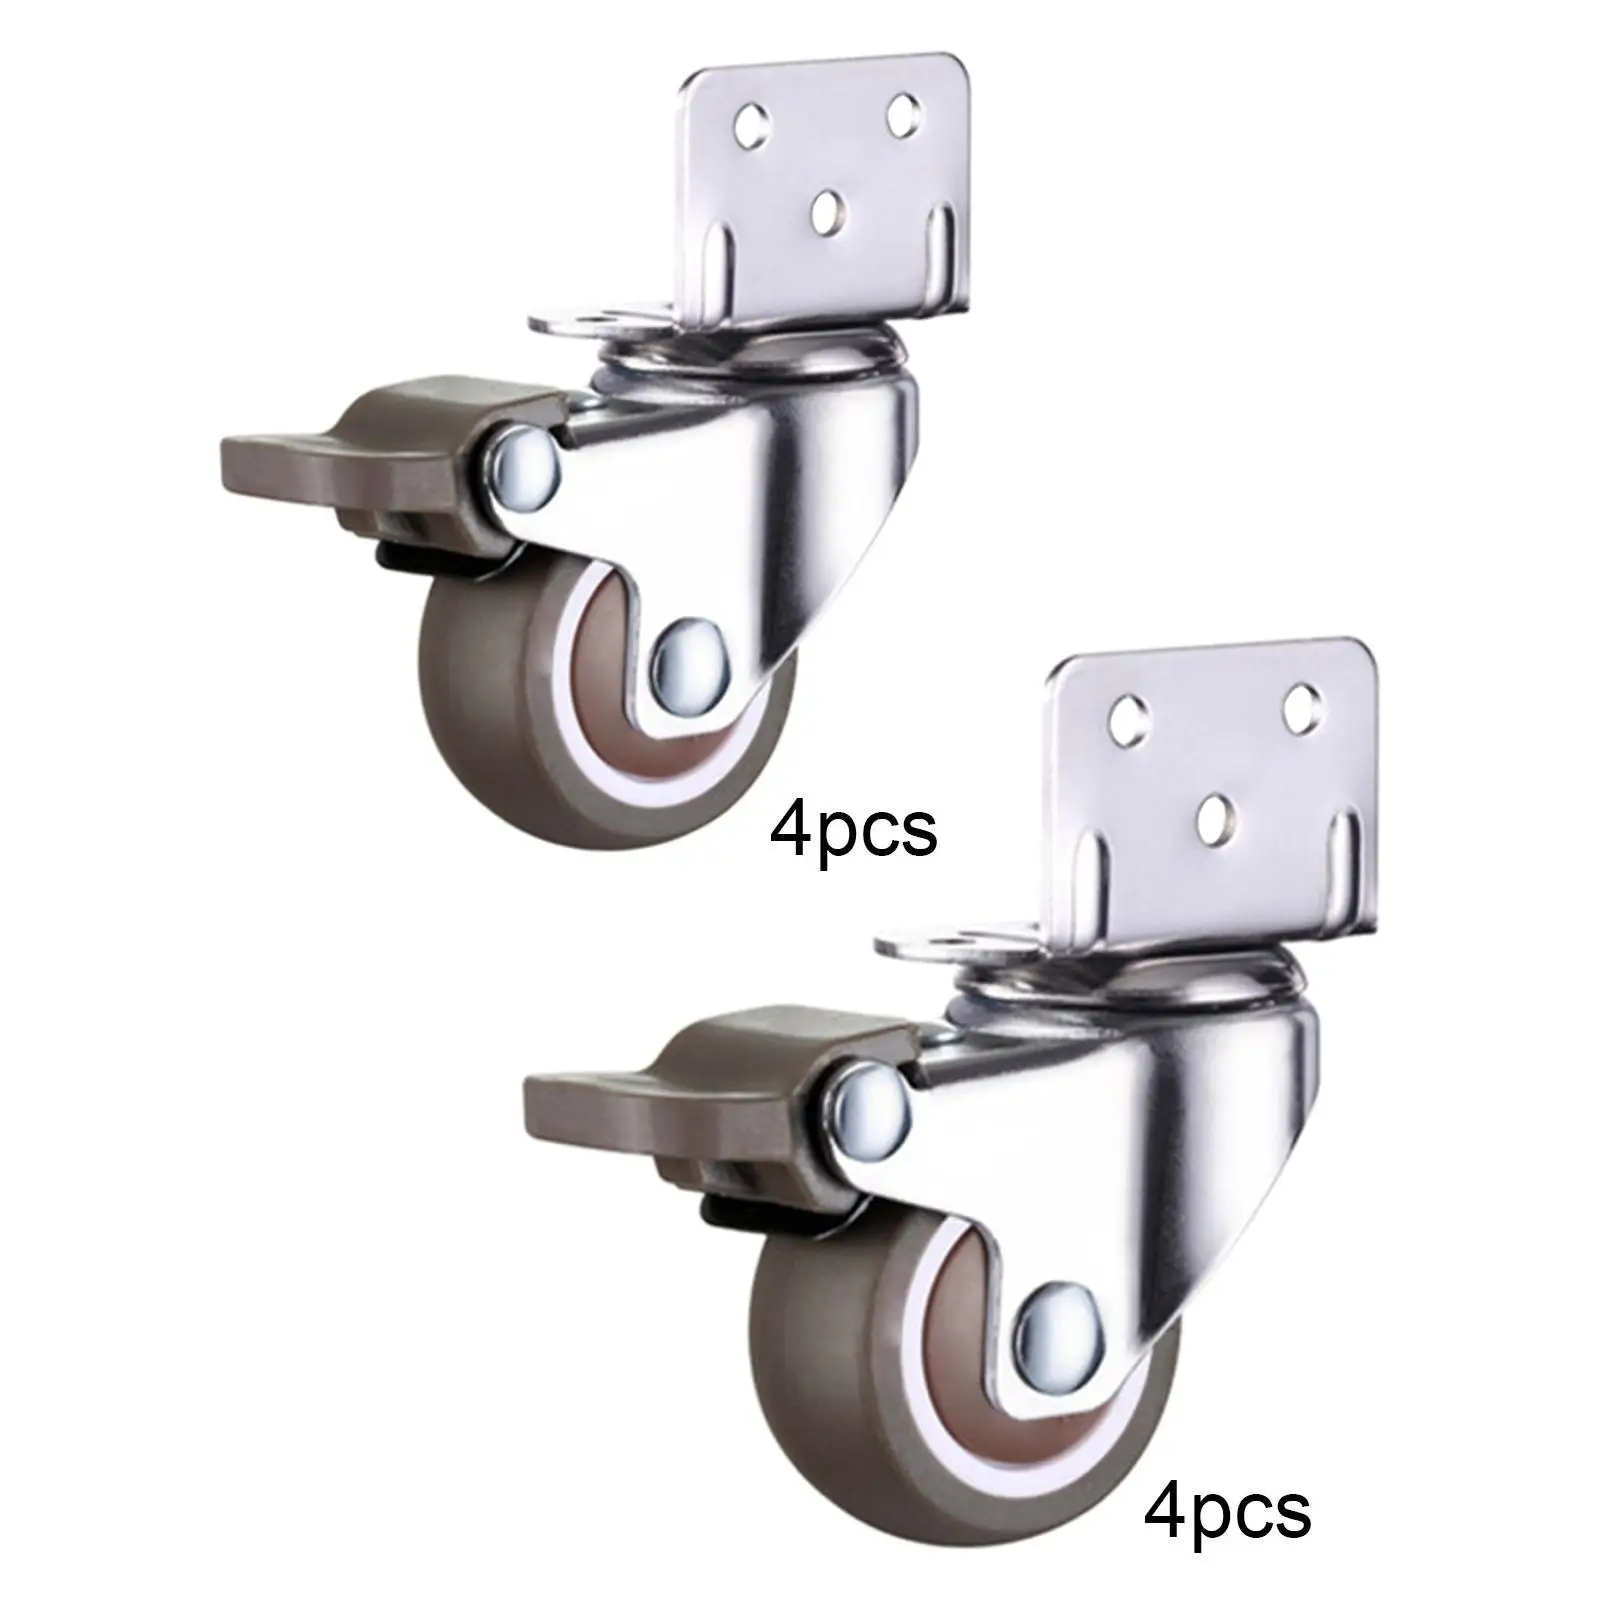 4Pcs Swivel Plate Casters Rubber Wheel Baby Bed Cabinet Silent Furniture